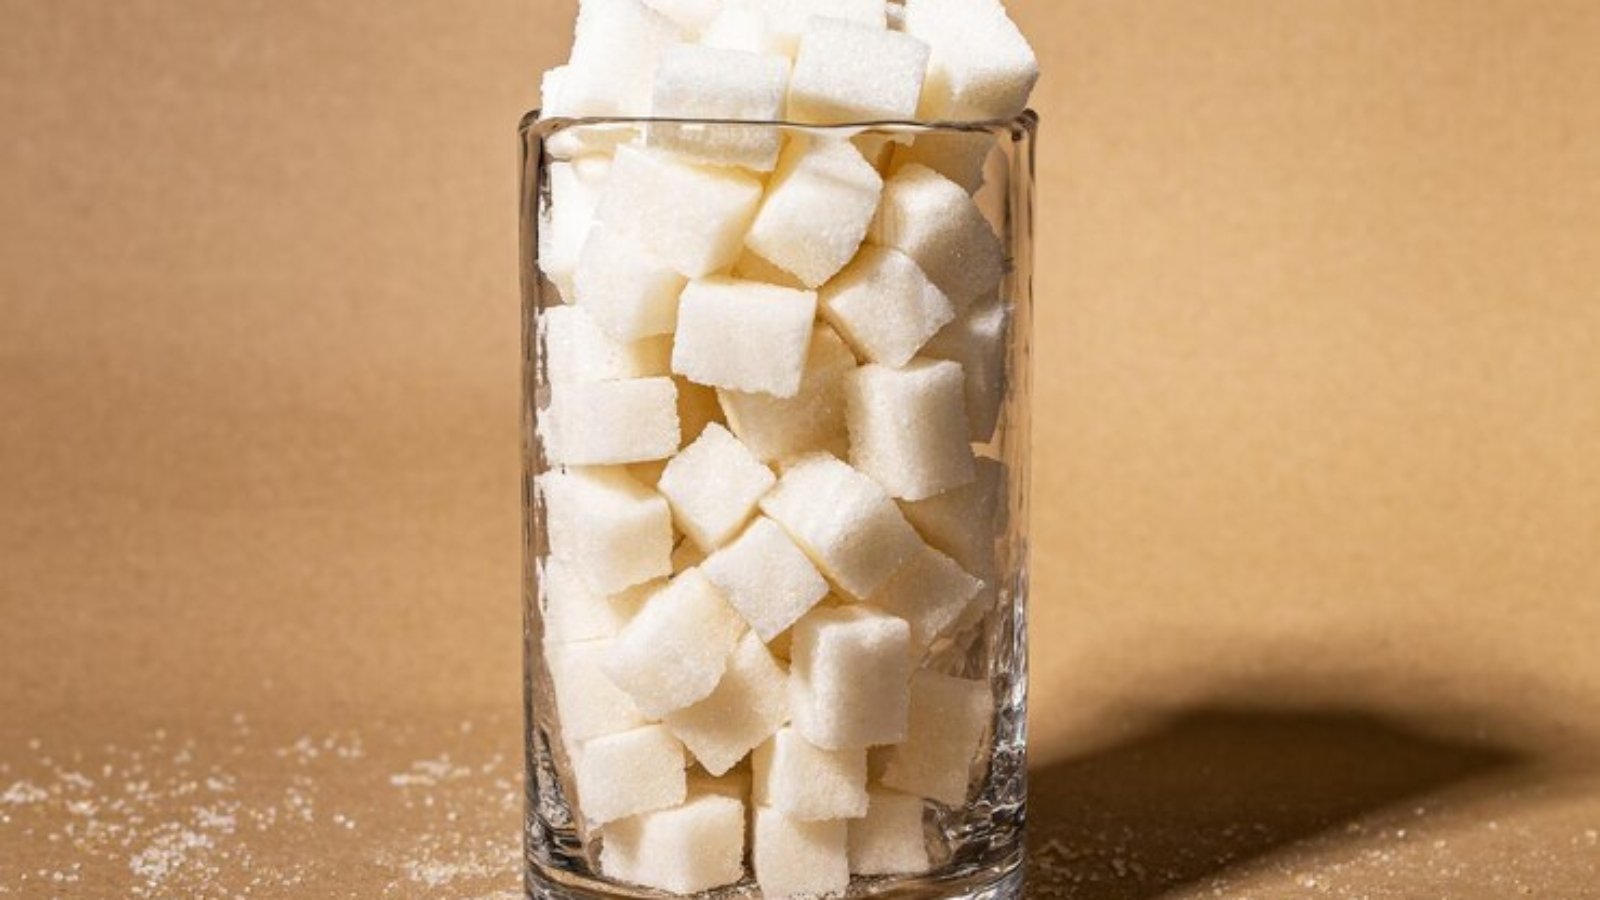 sugar-consumption-addiction-concept-refined-cubes-sweet-lumps-glass-sugary-food